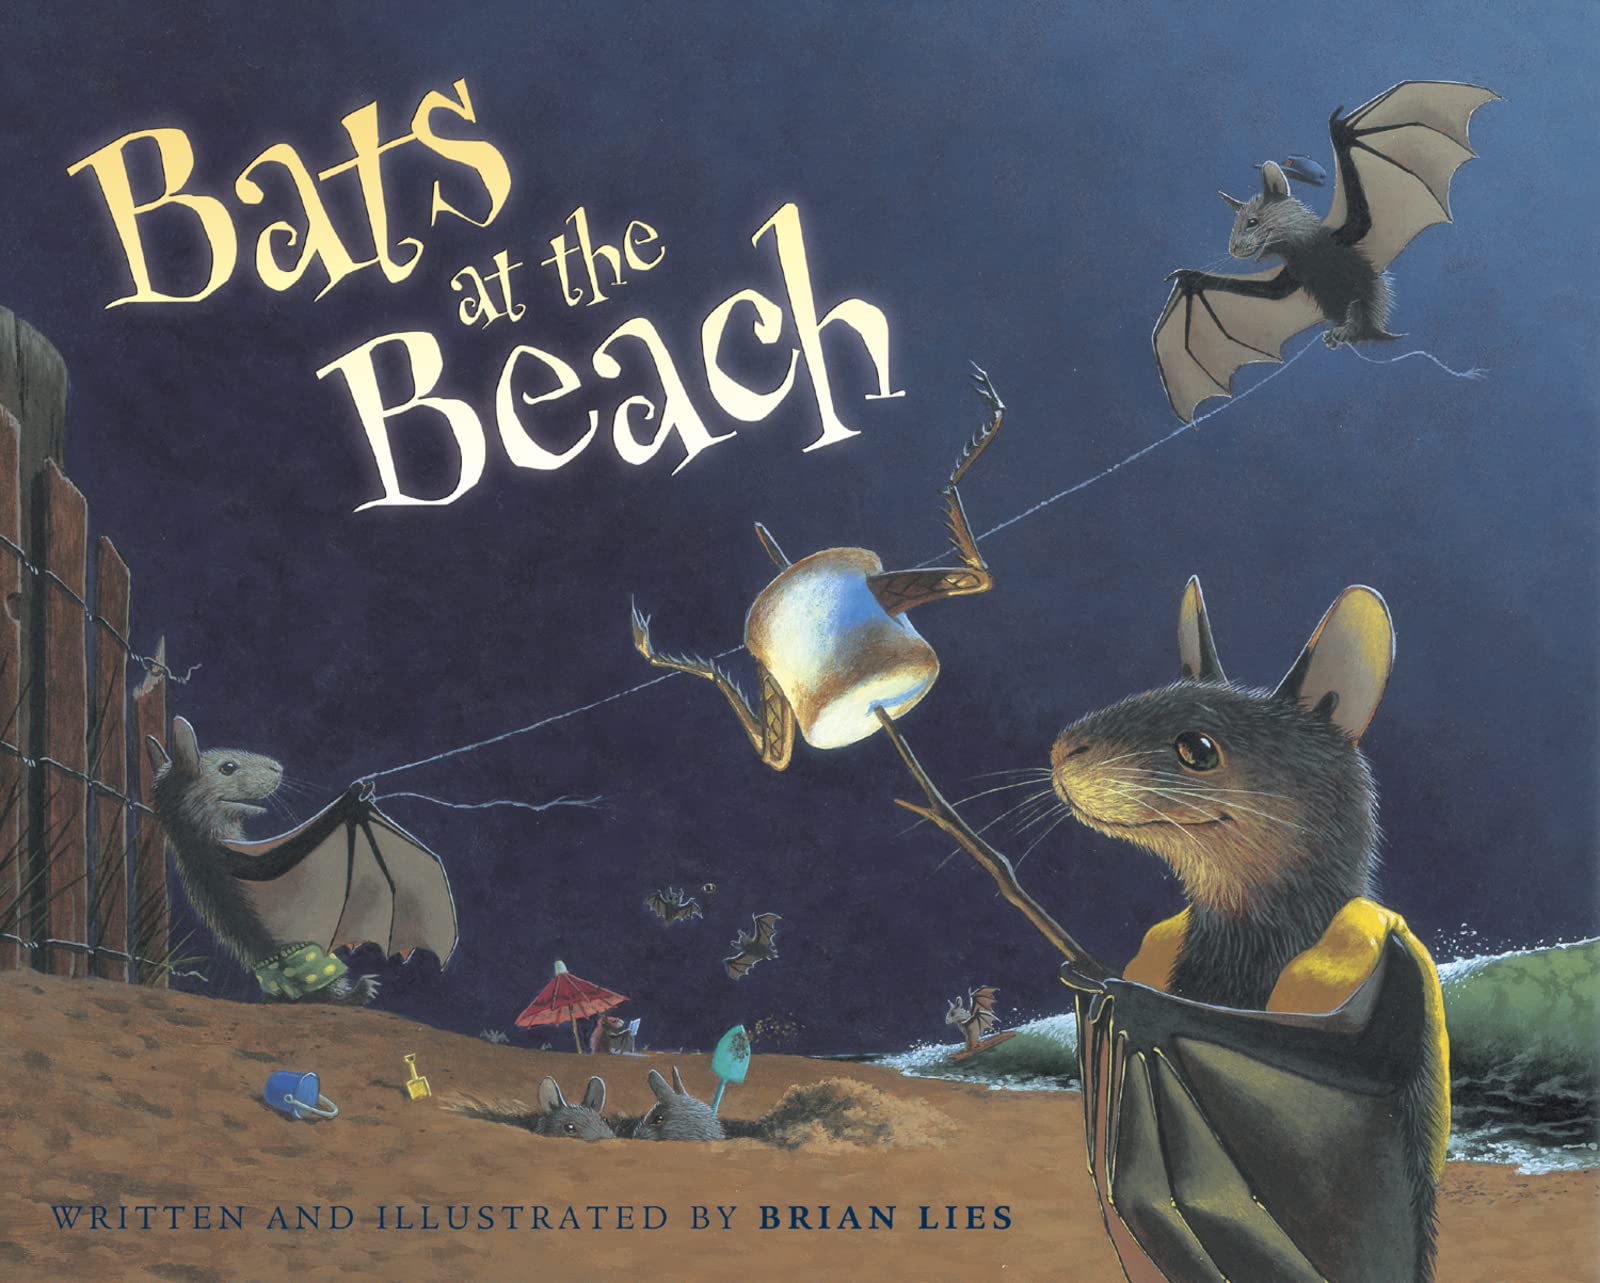 speech and language teaching concepts for Bats at the Beach in speech therapy​ ​